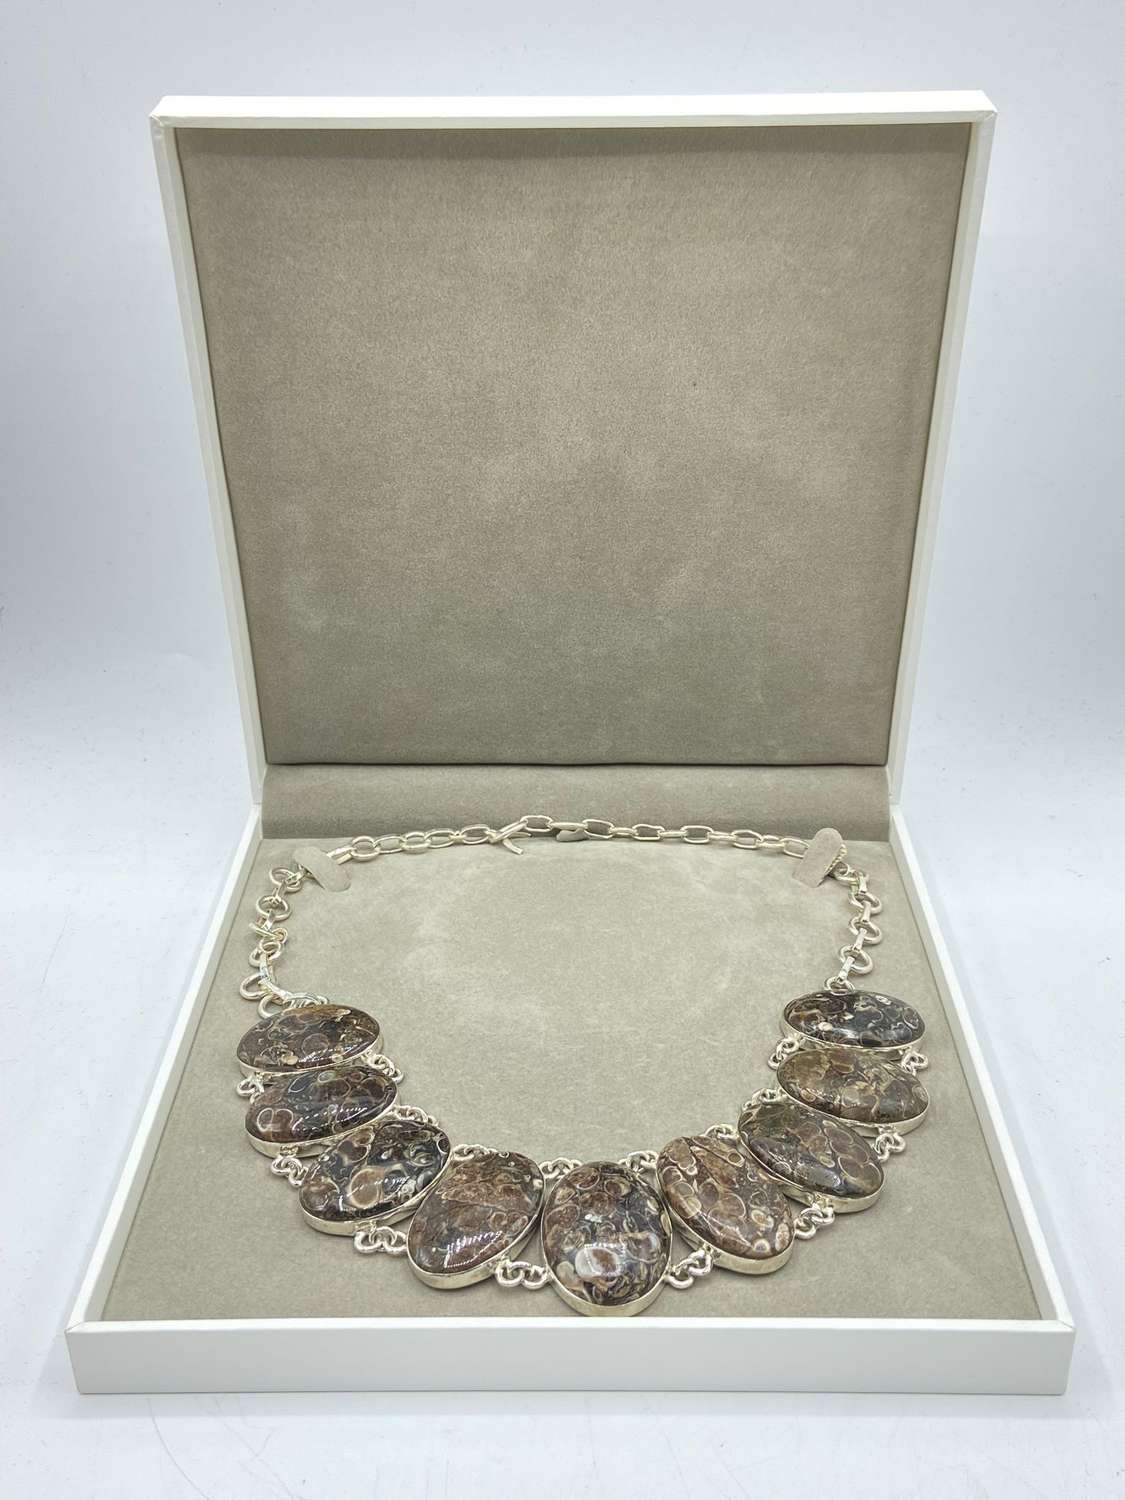 Beautiful Sterling Silver & Polished Turritella Agate Necklace & Case